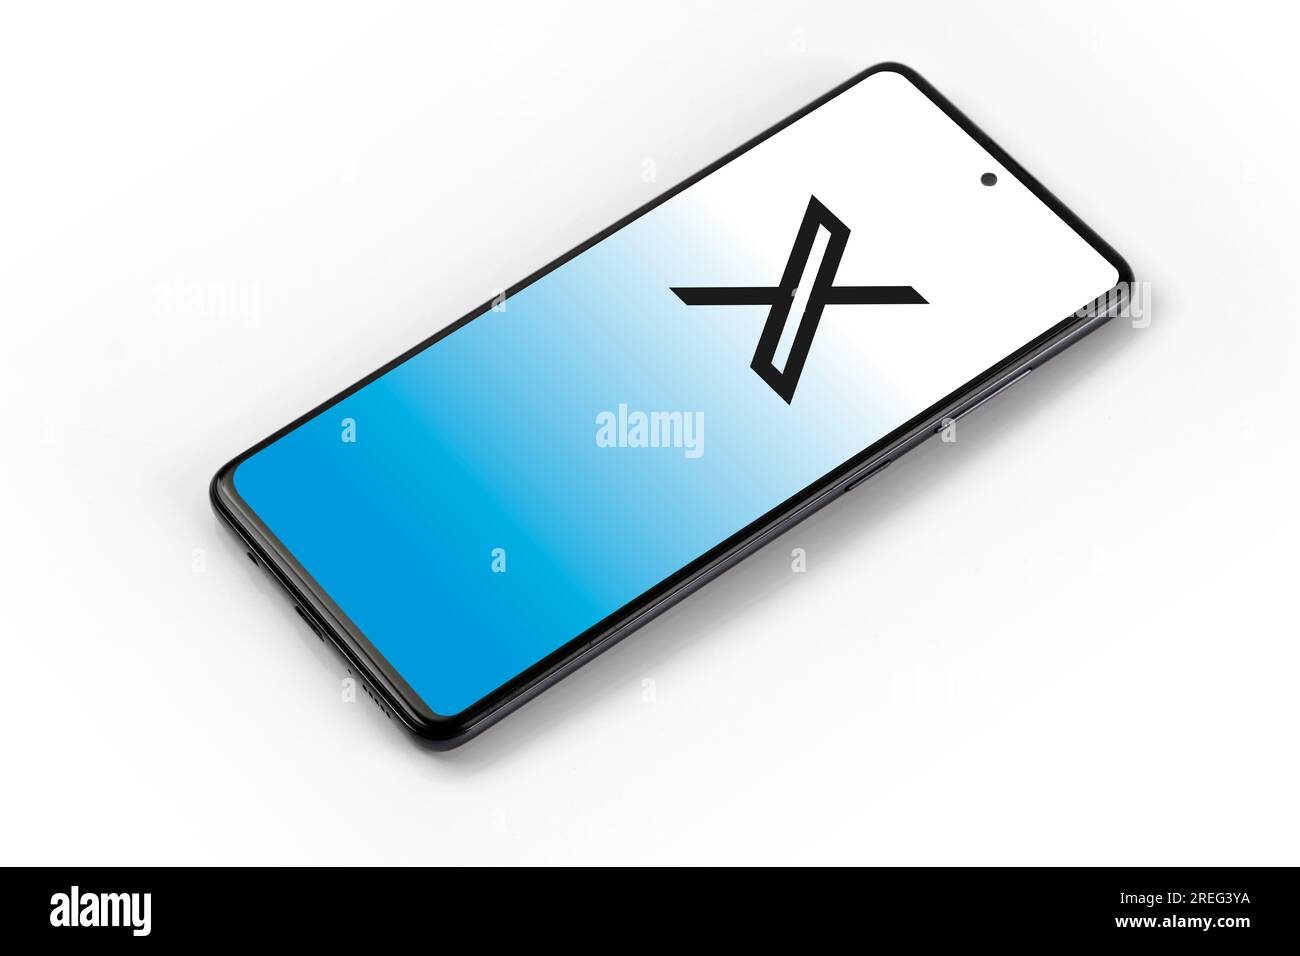 United States, July 26 2023, new logo brand Twitter with new X-shaped graphics on the mobile phone device Stock Photo